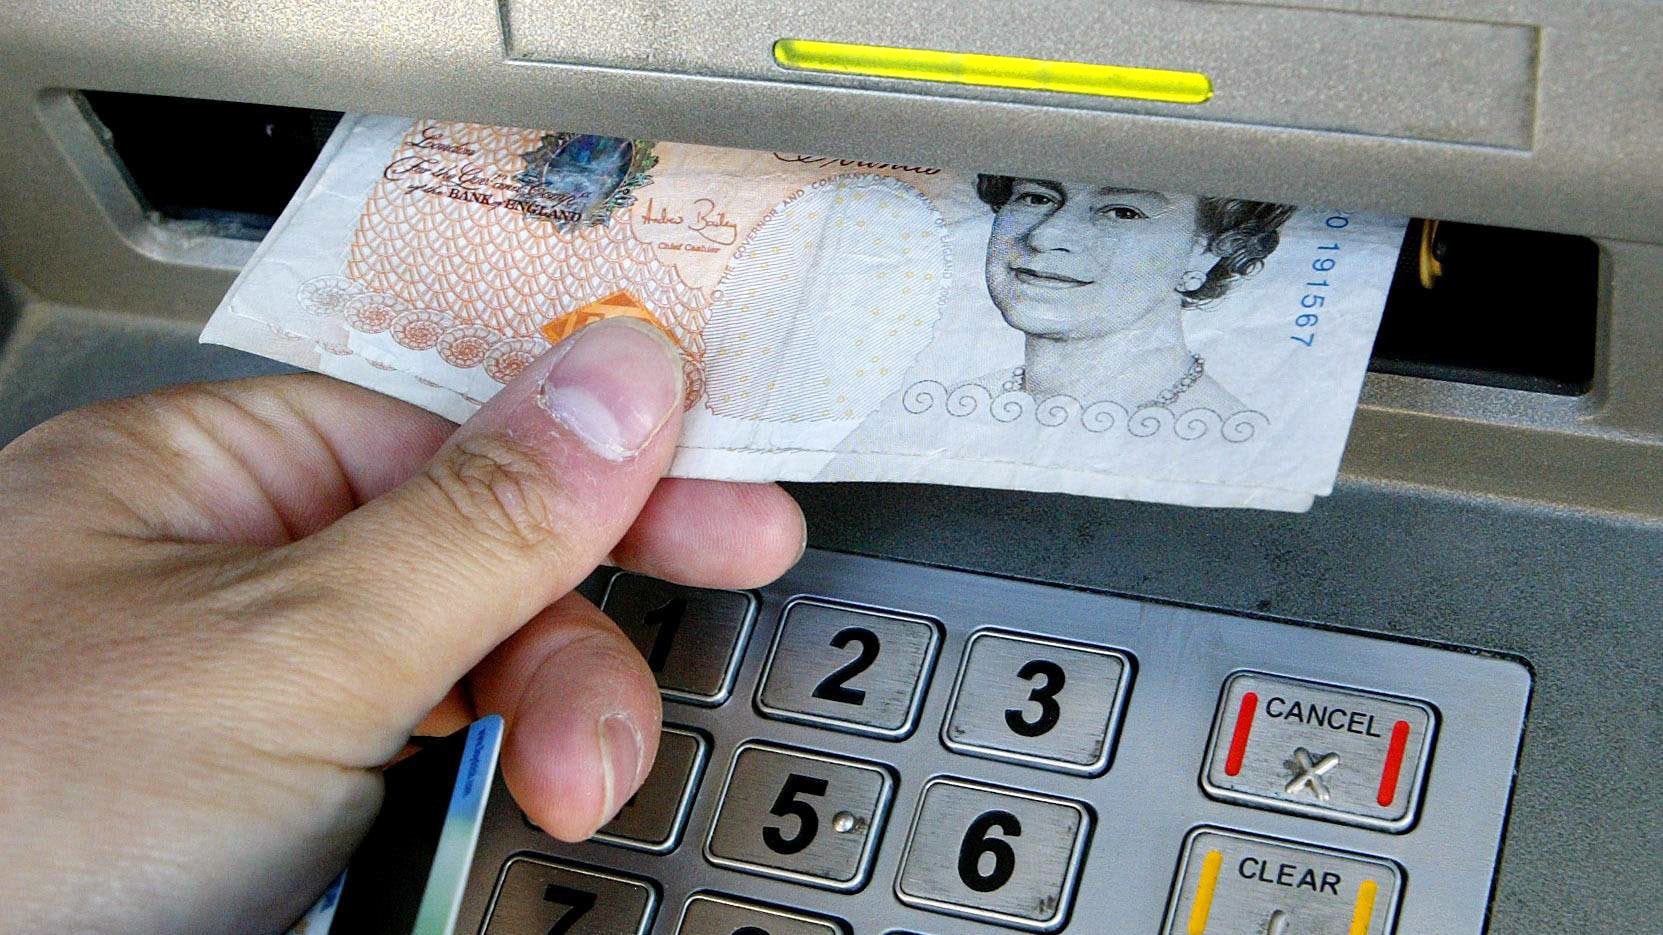 An initiative which allows people to use a single ATM to make deposits with multiple banks is being trialled